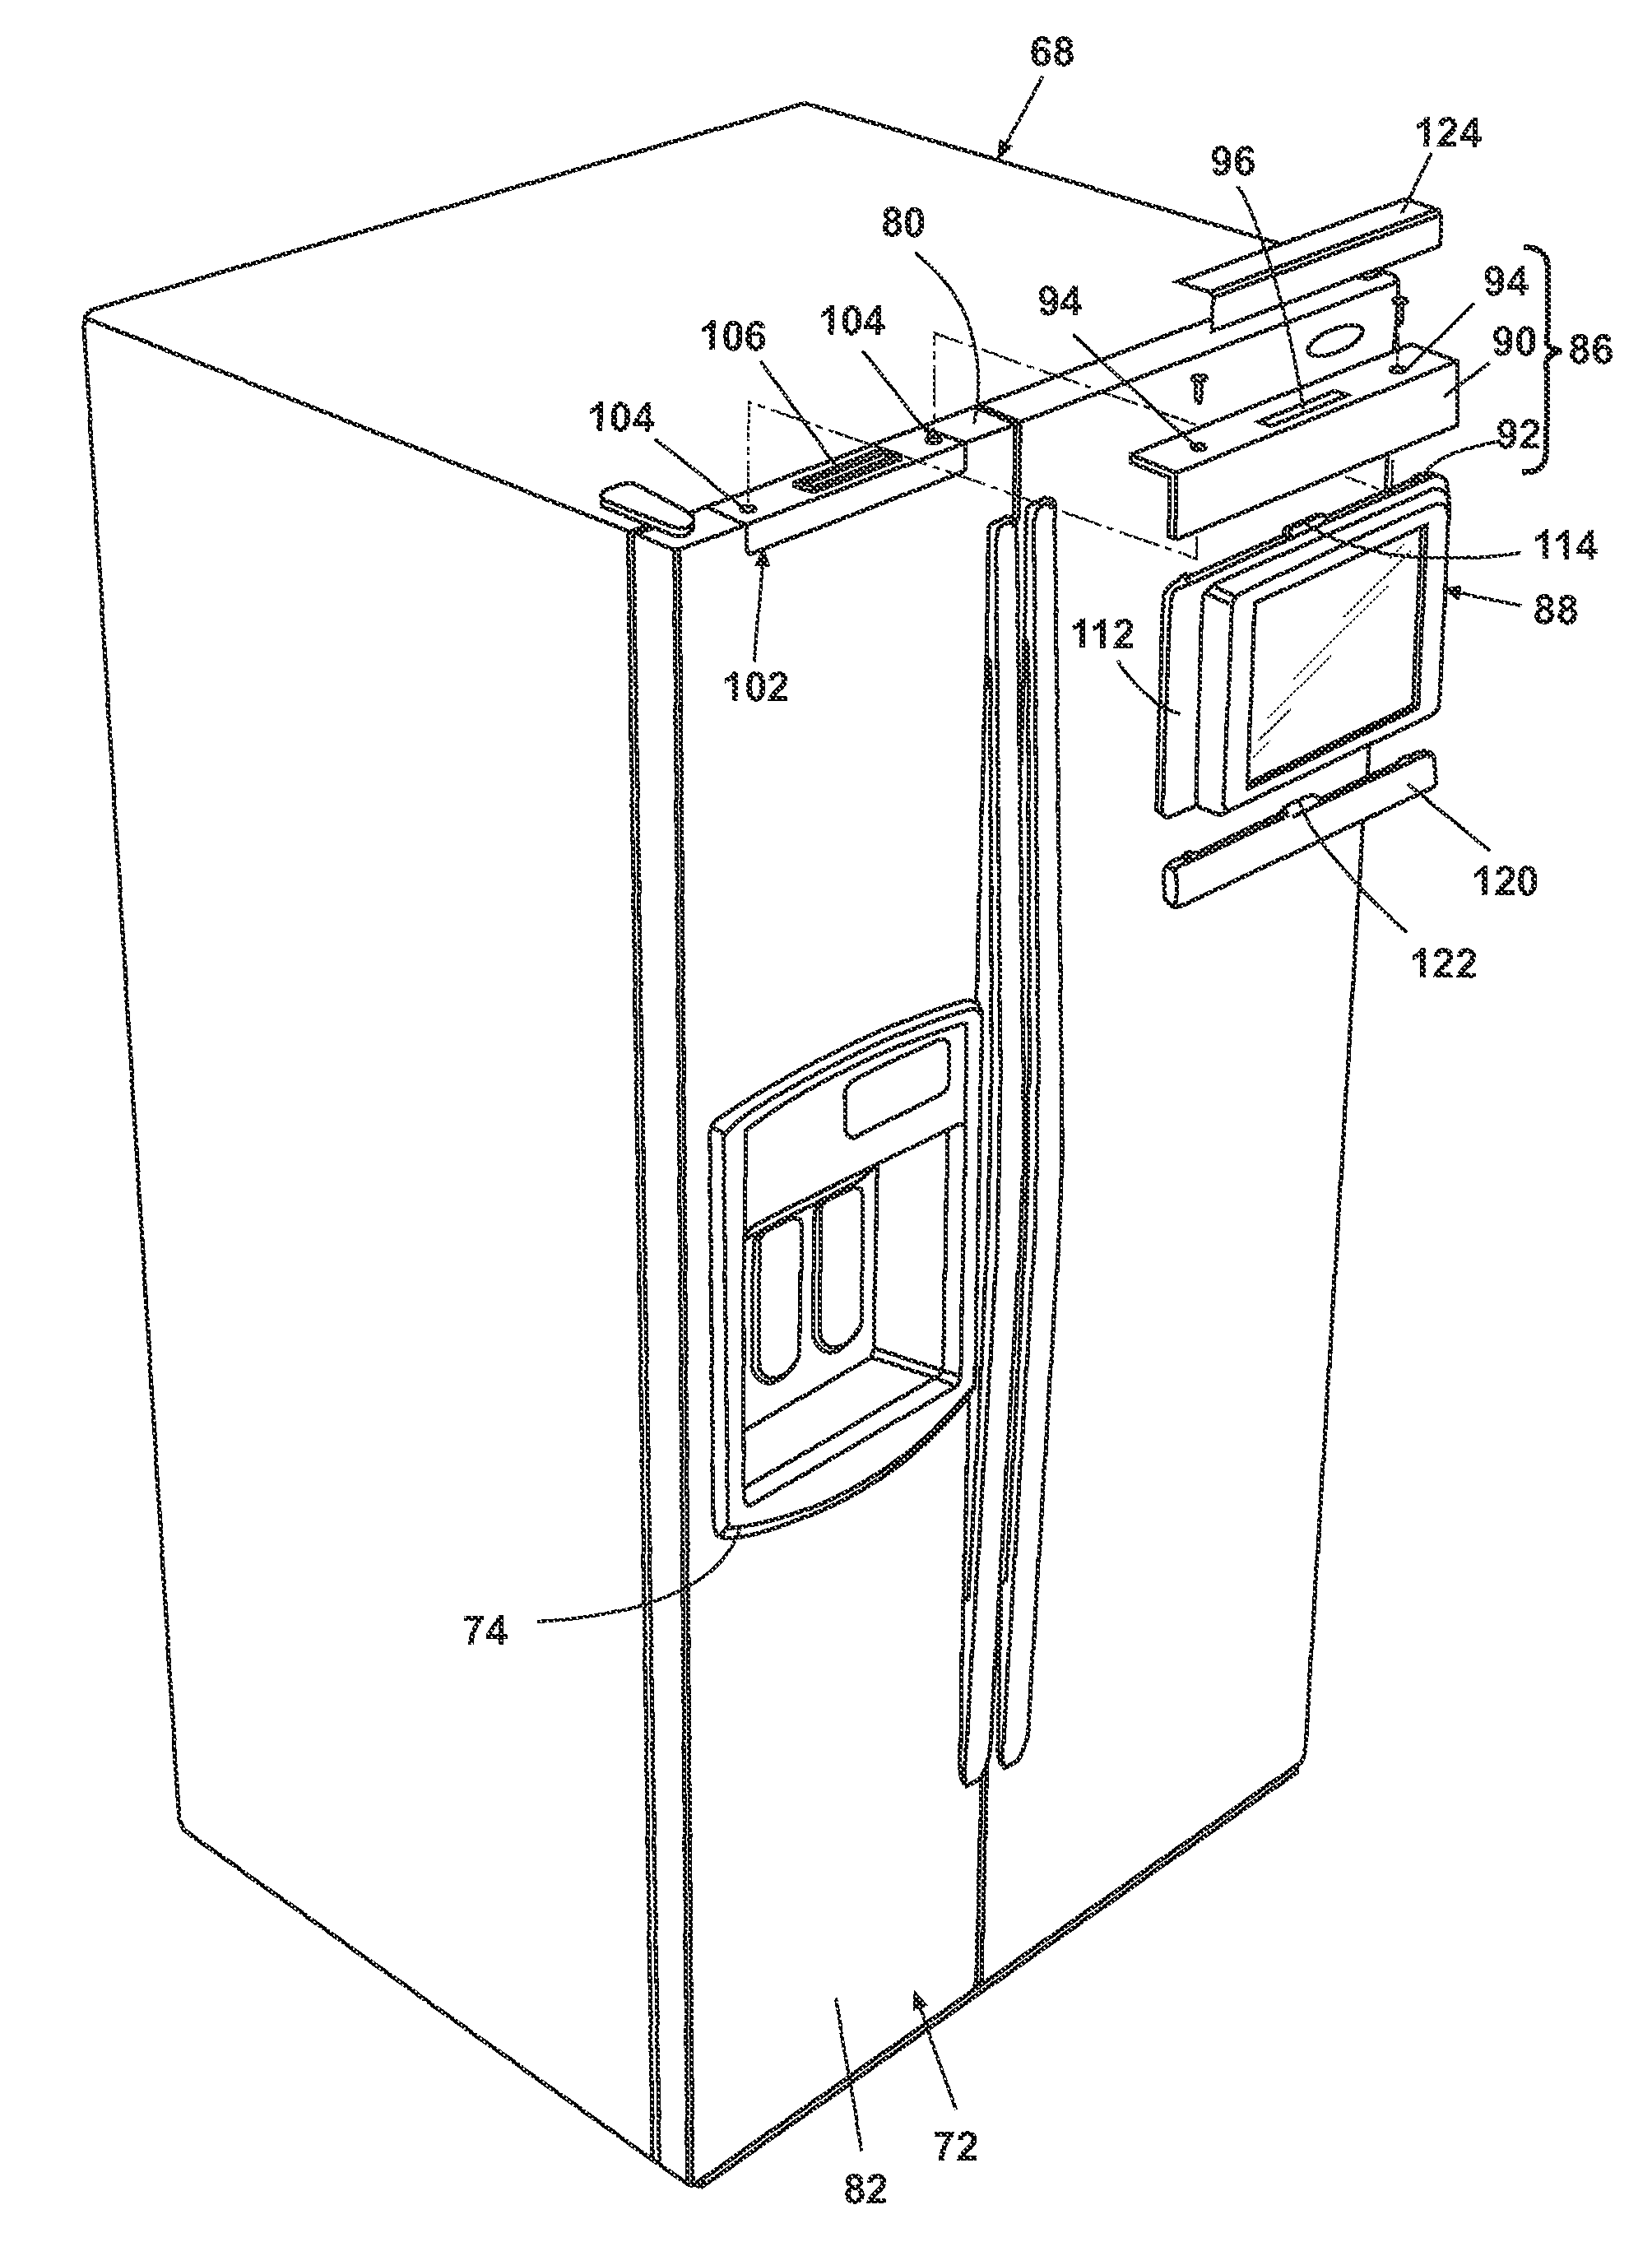 Appliance door with a service interface